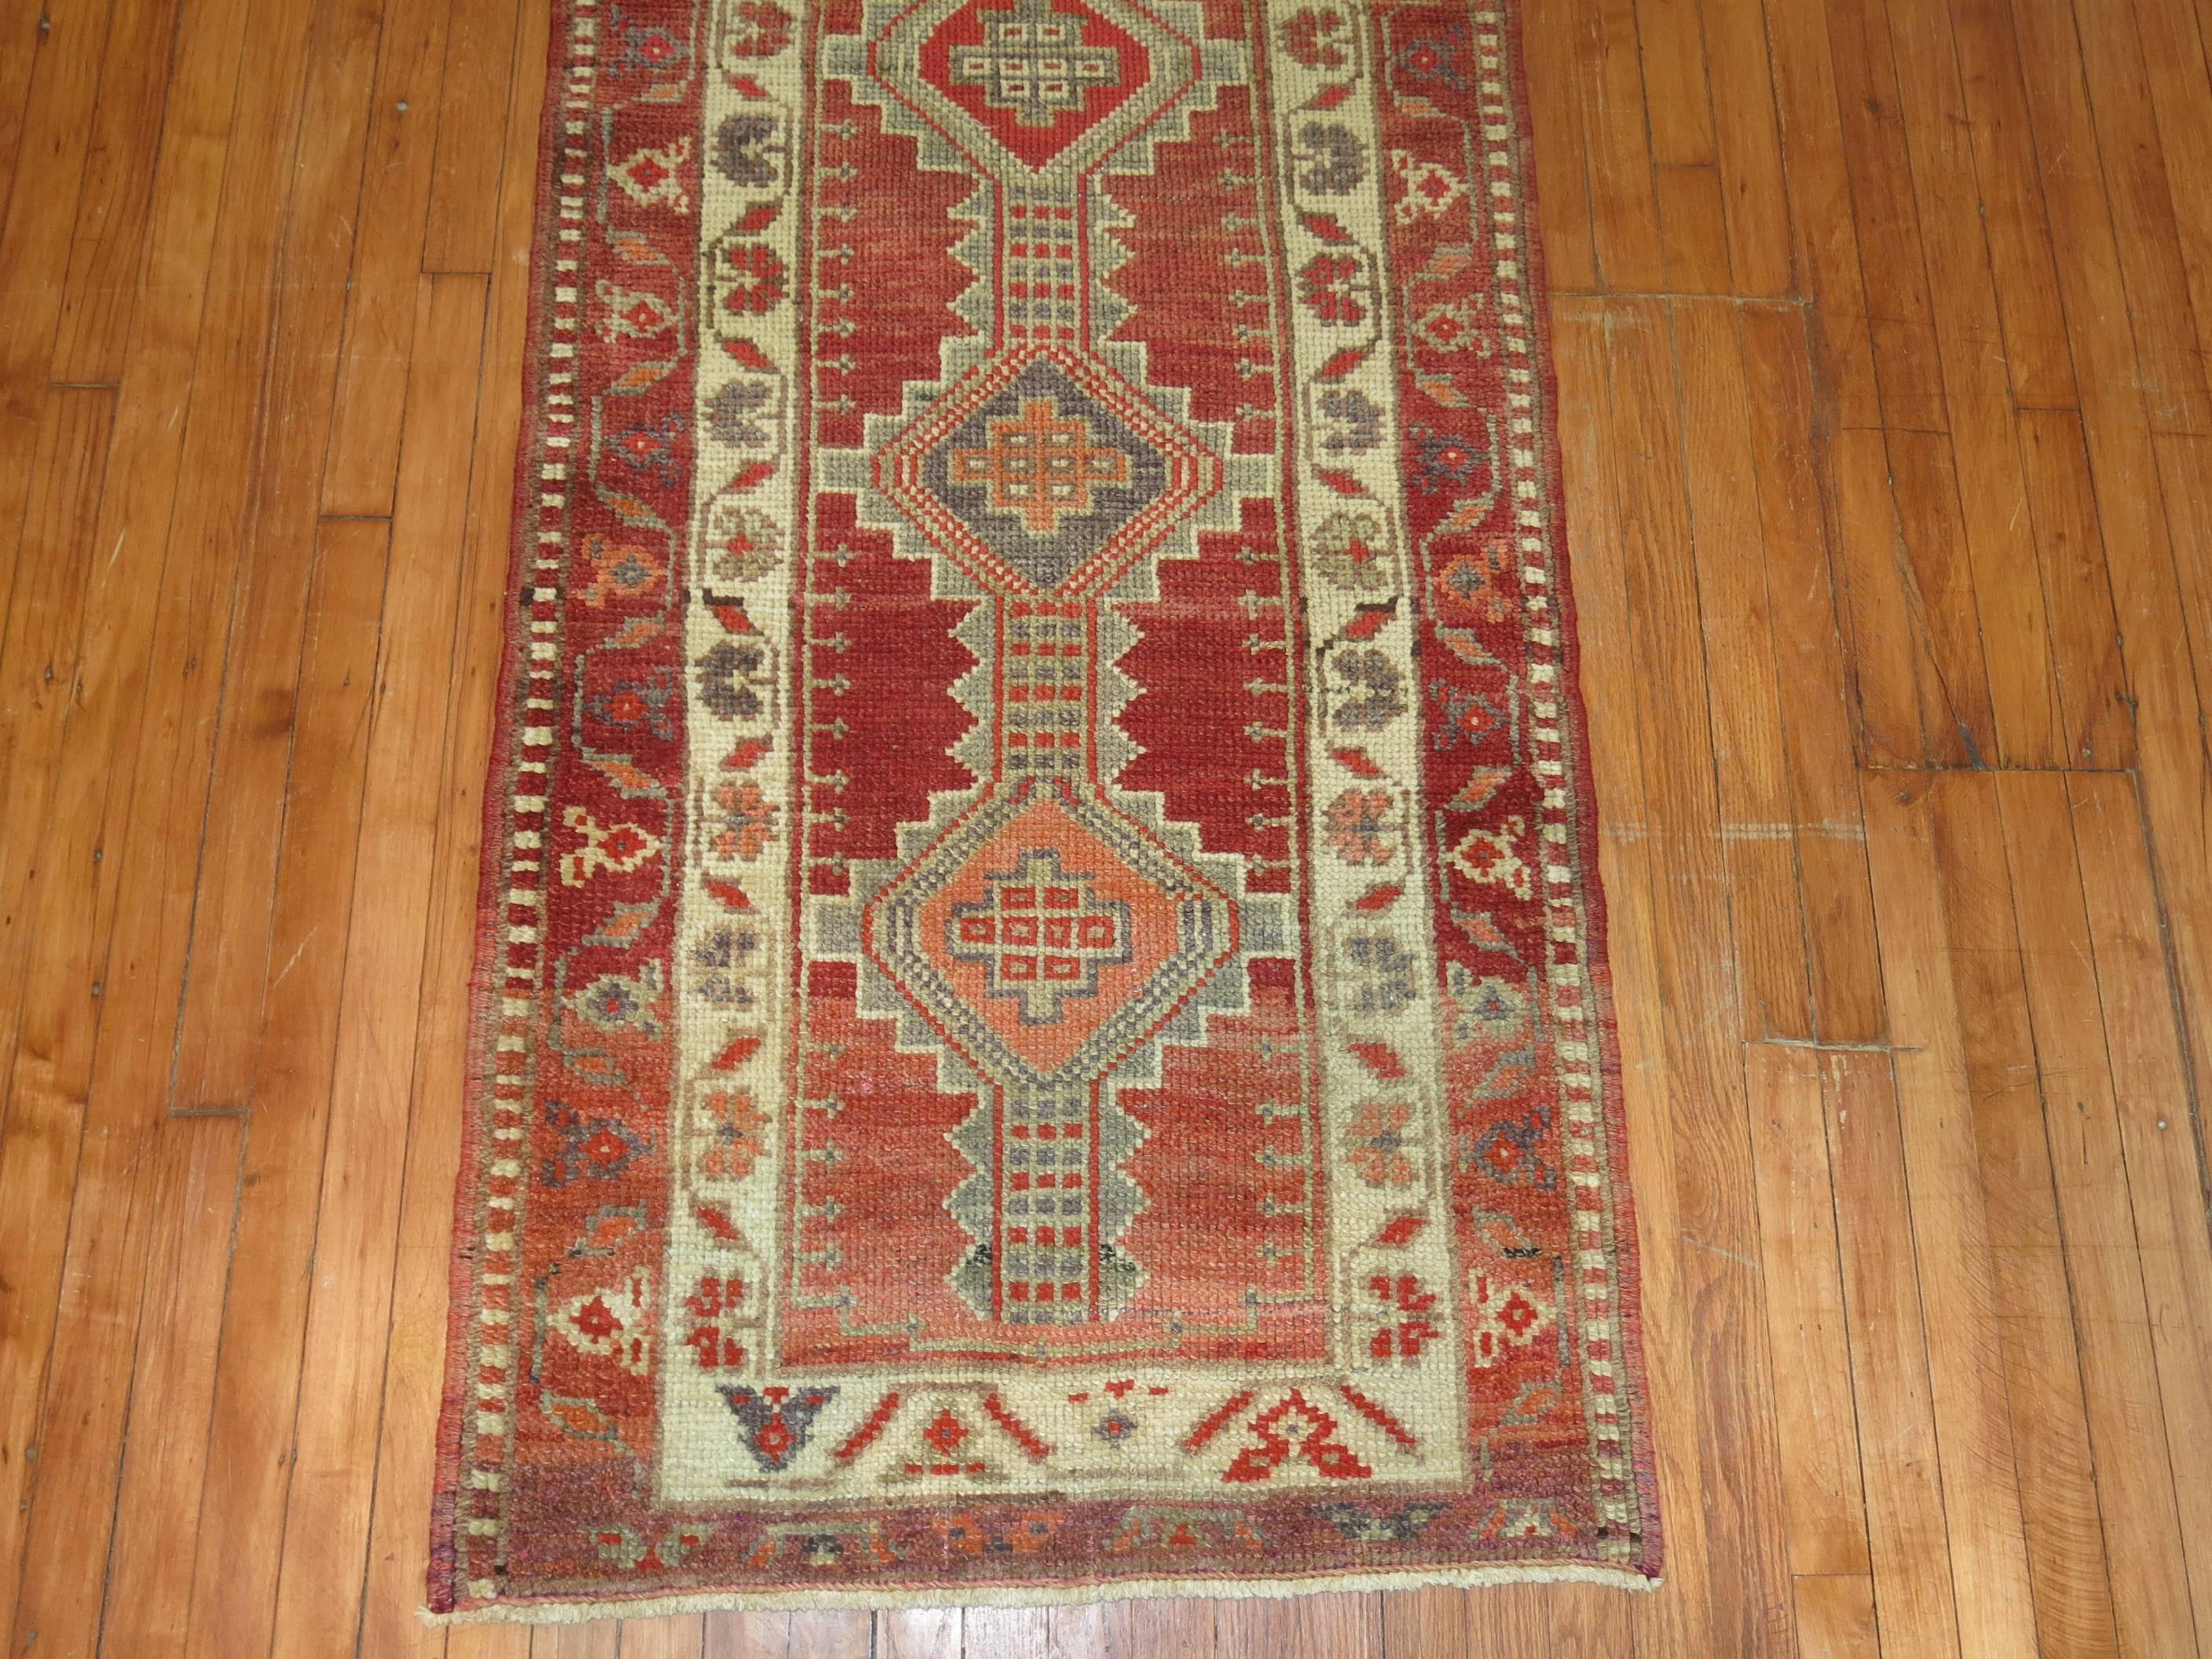 Vintage Turkish geometric tribal motif runner from the mid-20th century.

Measures: 2'10